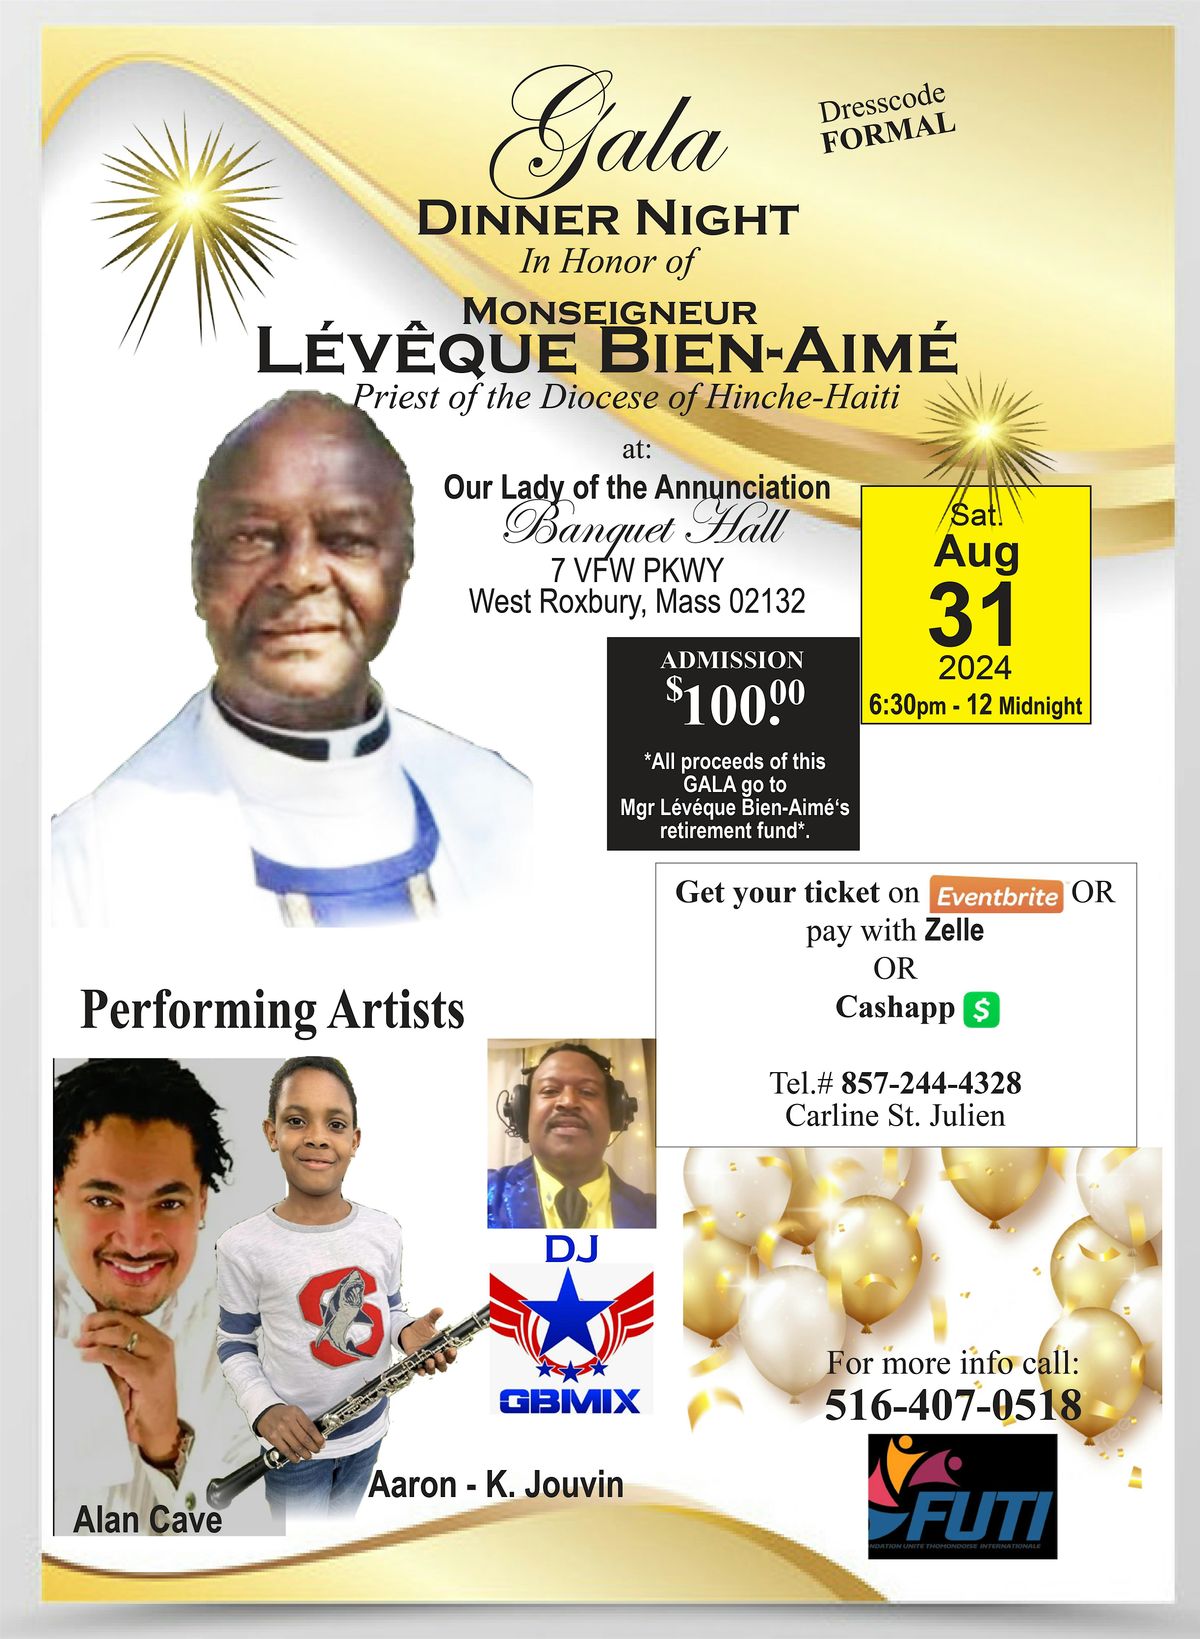 GALA DINNER NIGHT IN HONOR OF MONSEIGNEUR LEVEQUE BIEN-AIME - BOSTON, MASS